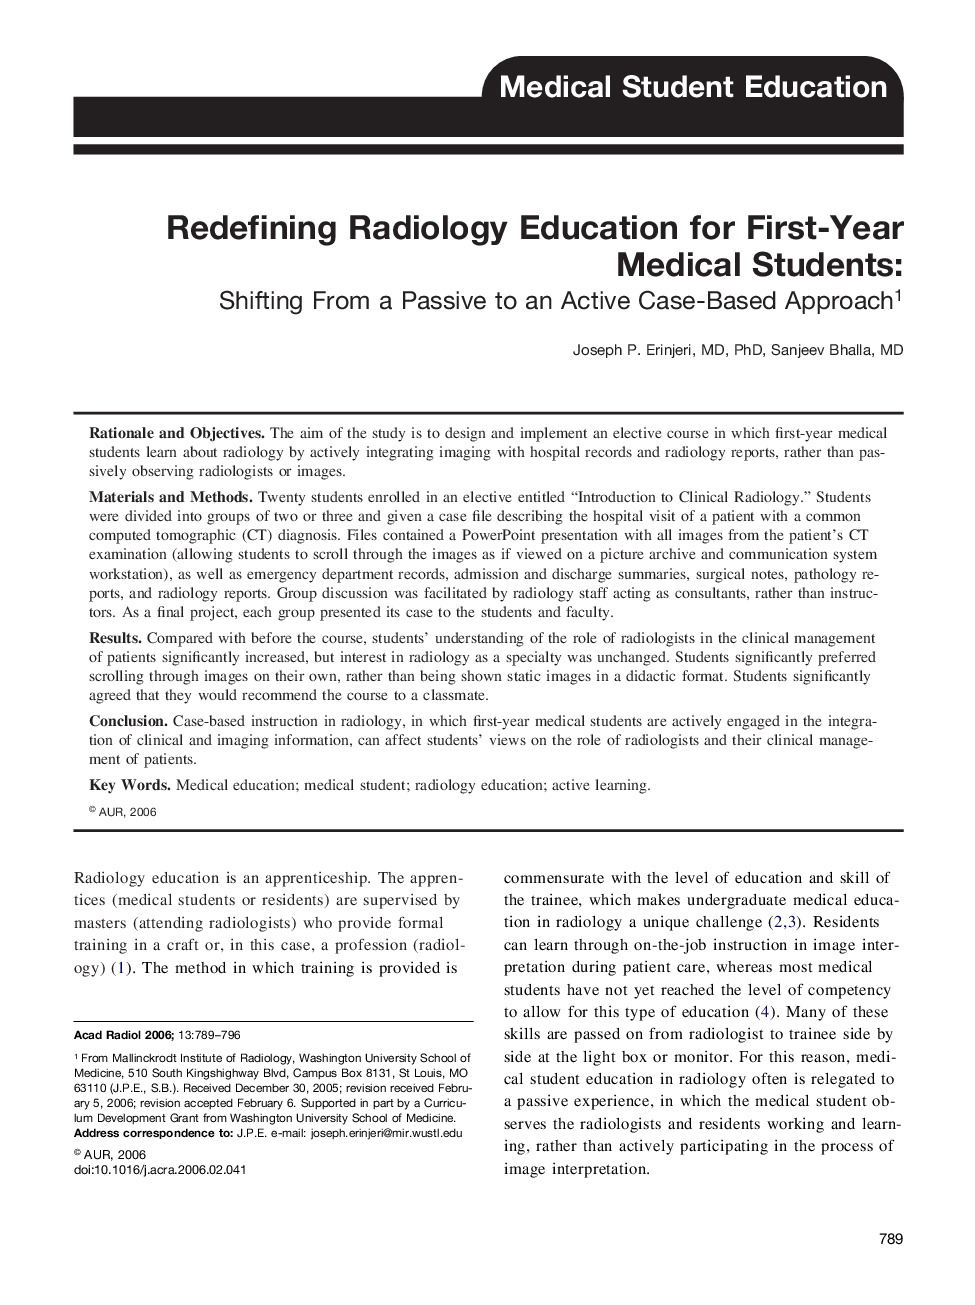 Redefining Radiology Education for First-Year Medical Students